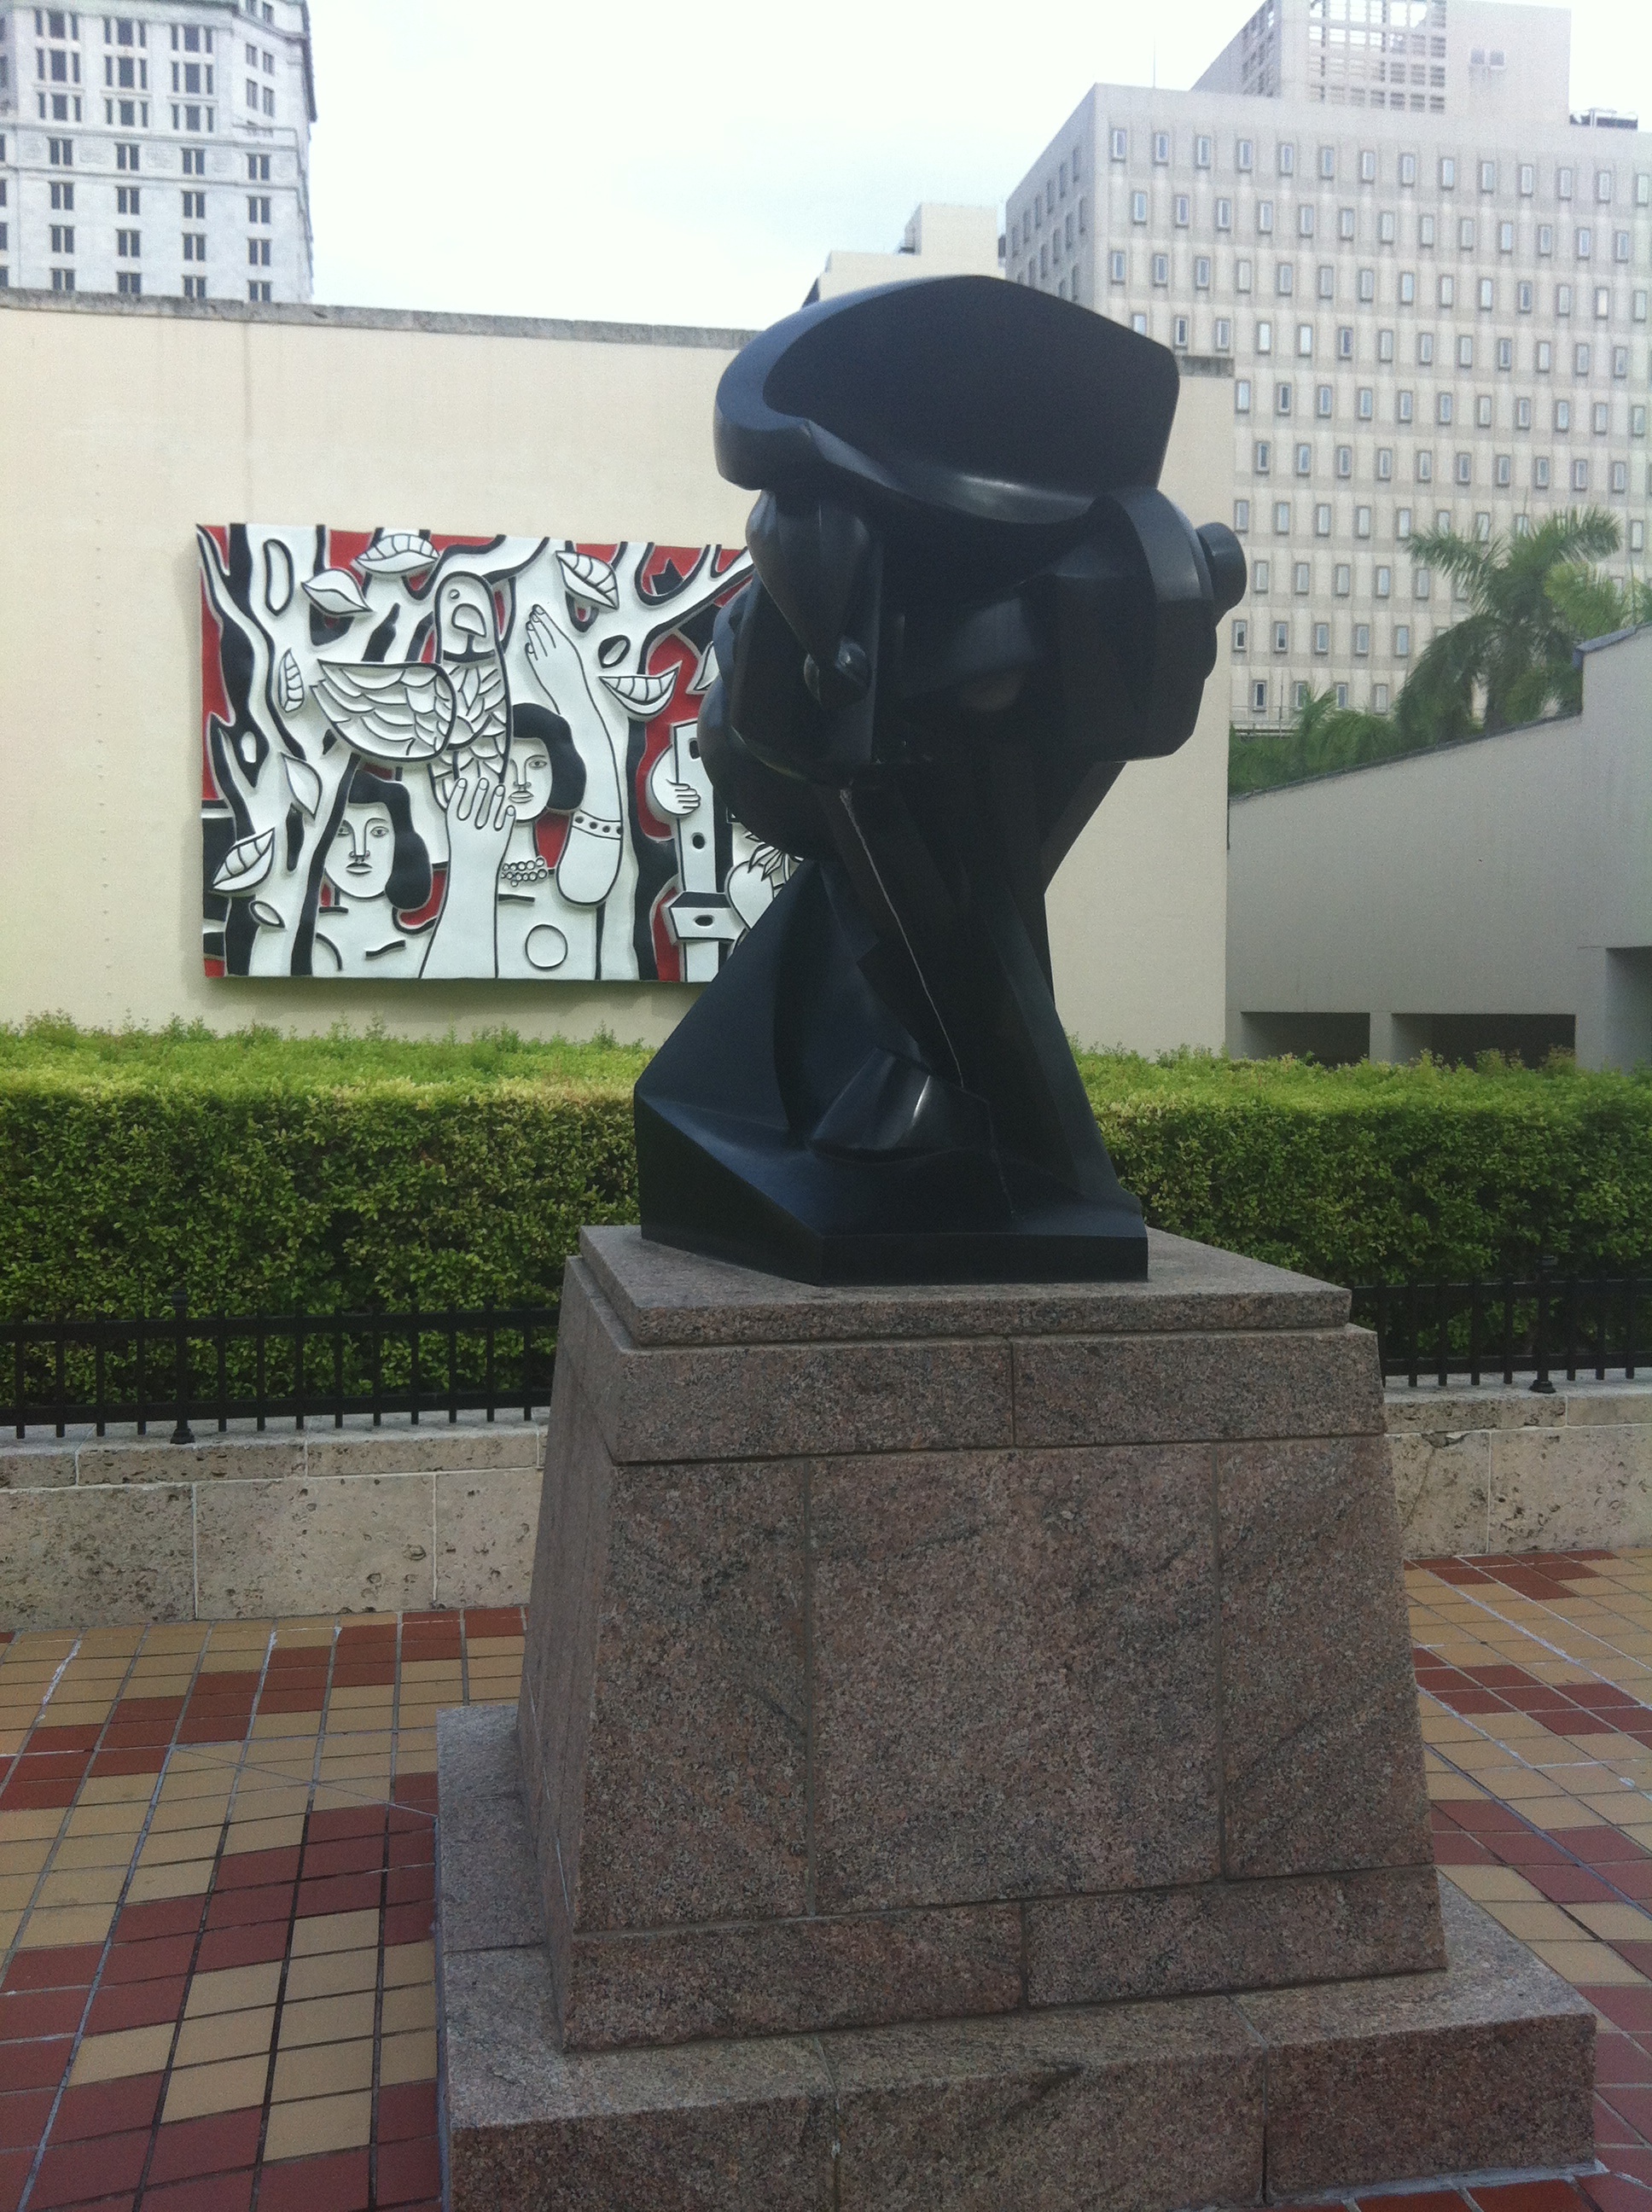 Statue and artwork outside of the Miami Art Museum (Photo by Maleana Davis)